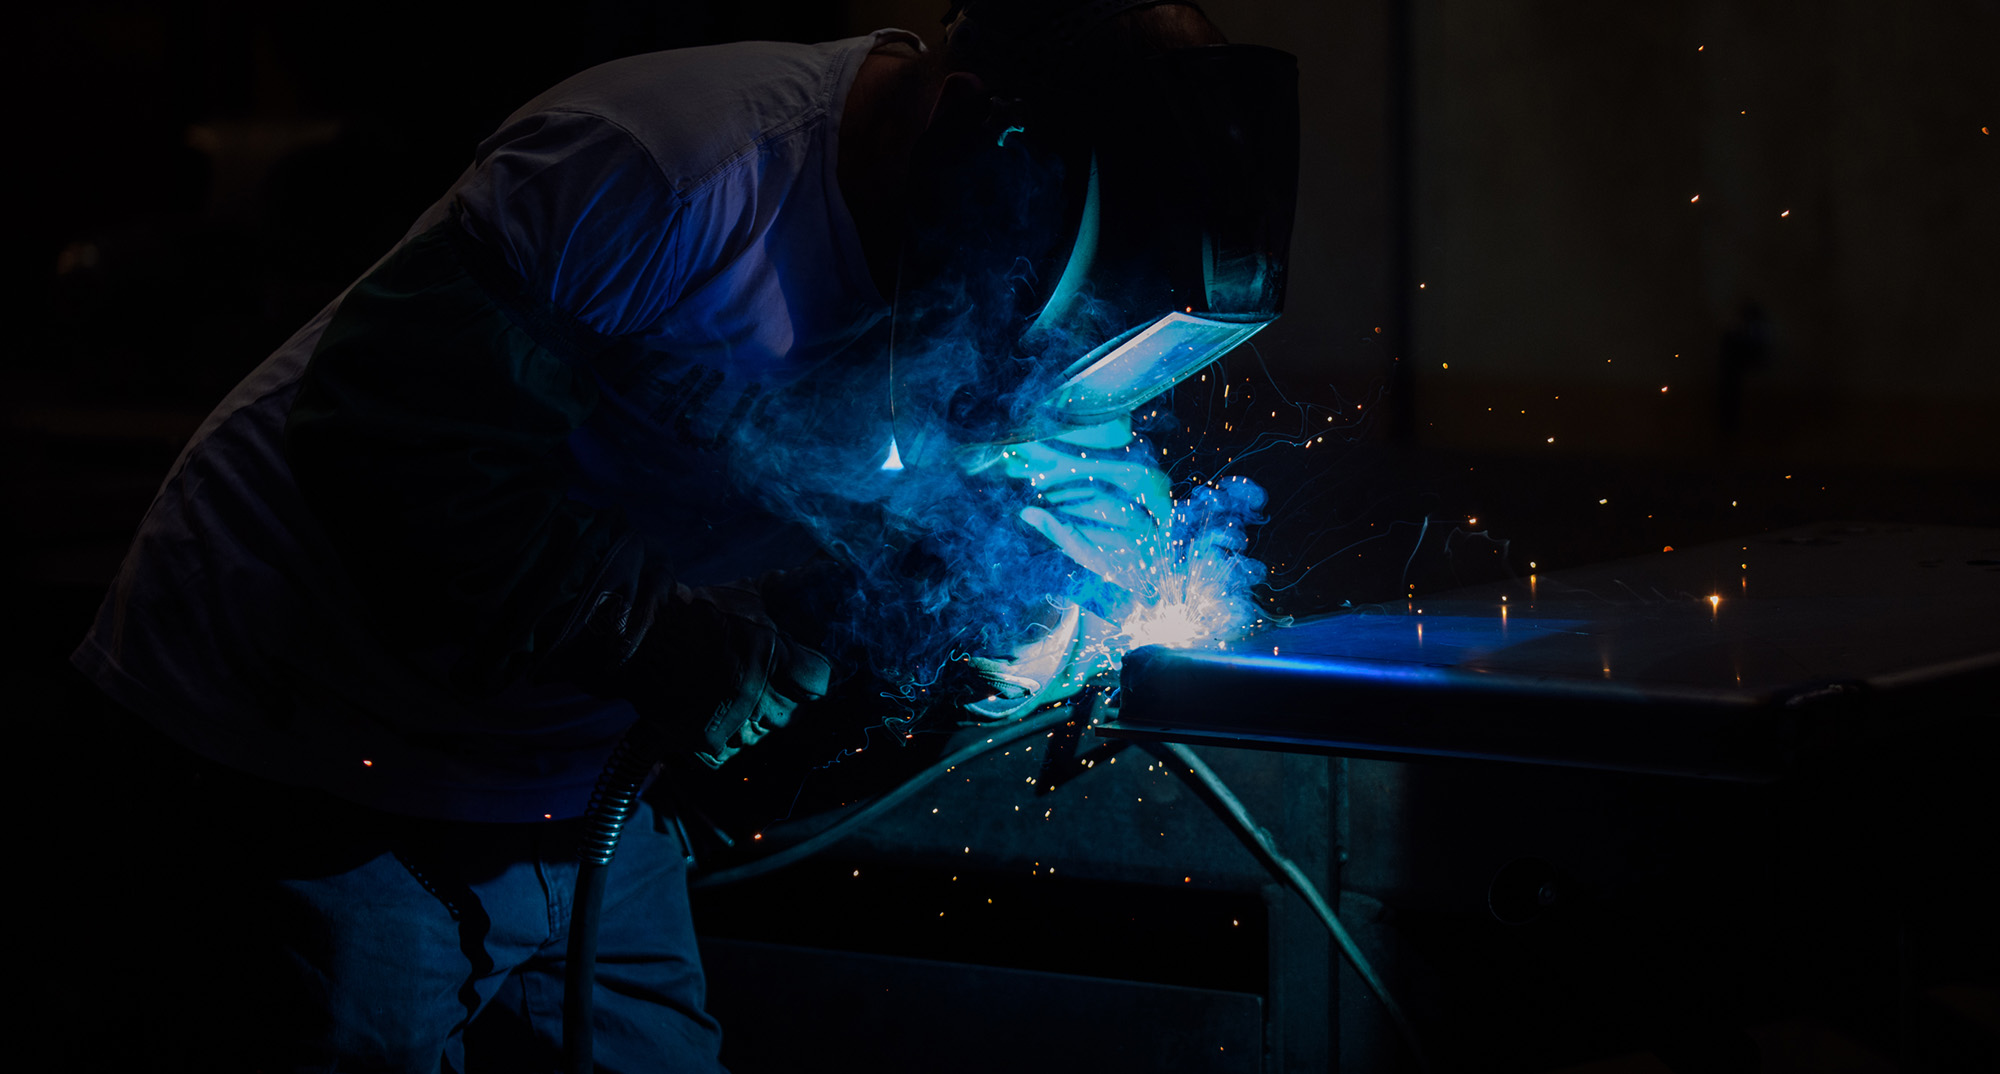 A worker welds parts for a ballot drop box inside a manufacturing facility in Puyallup, Washington.